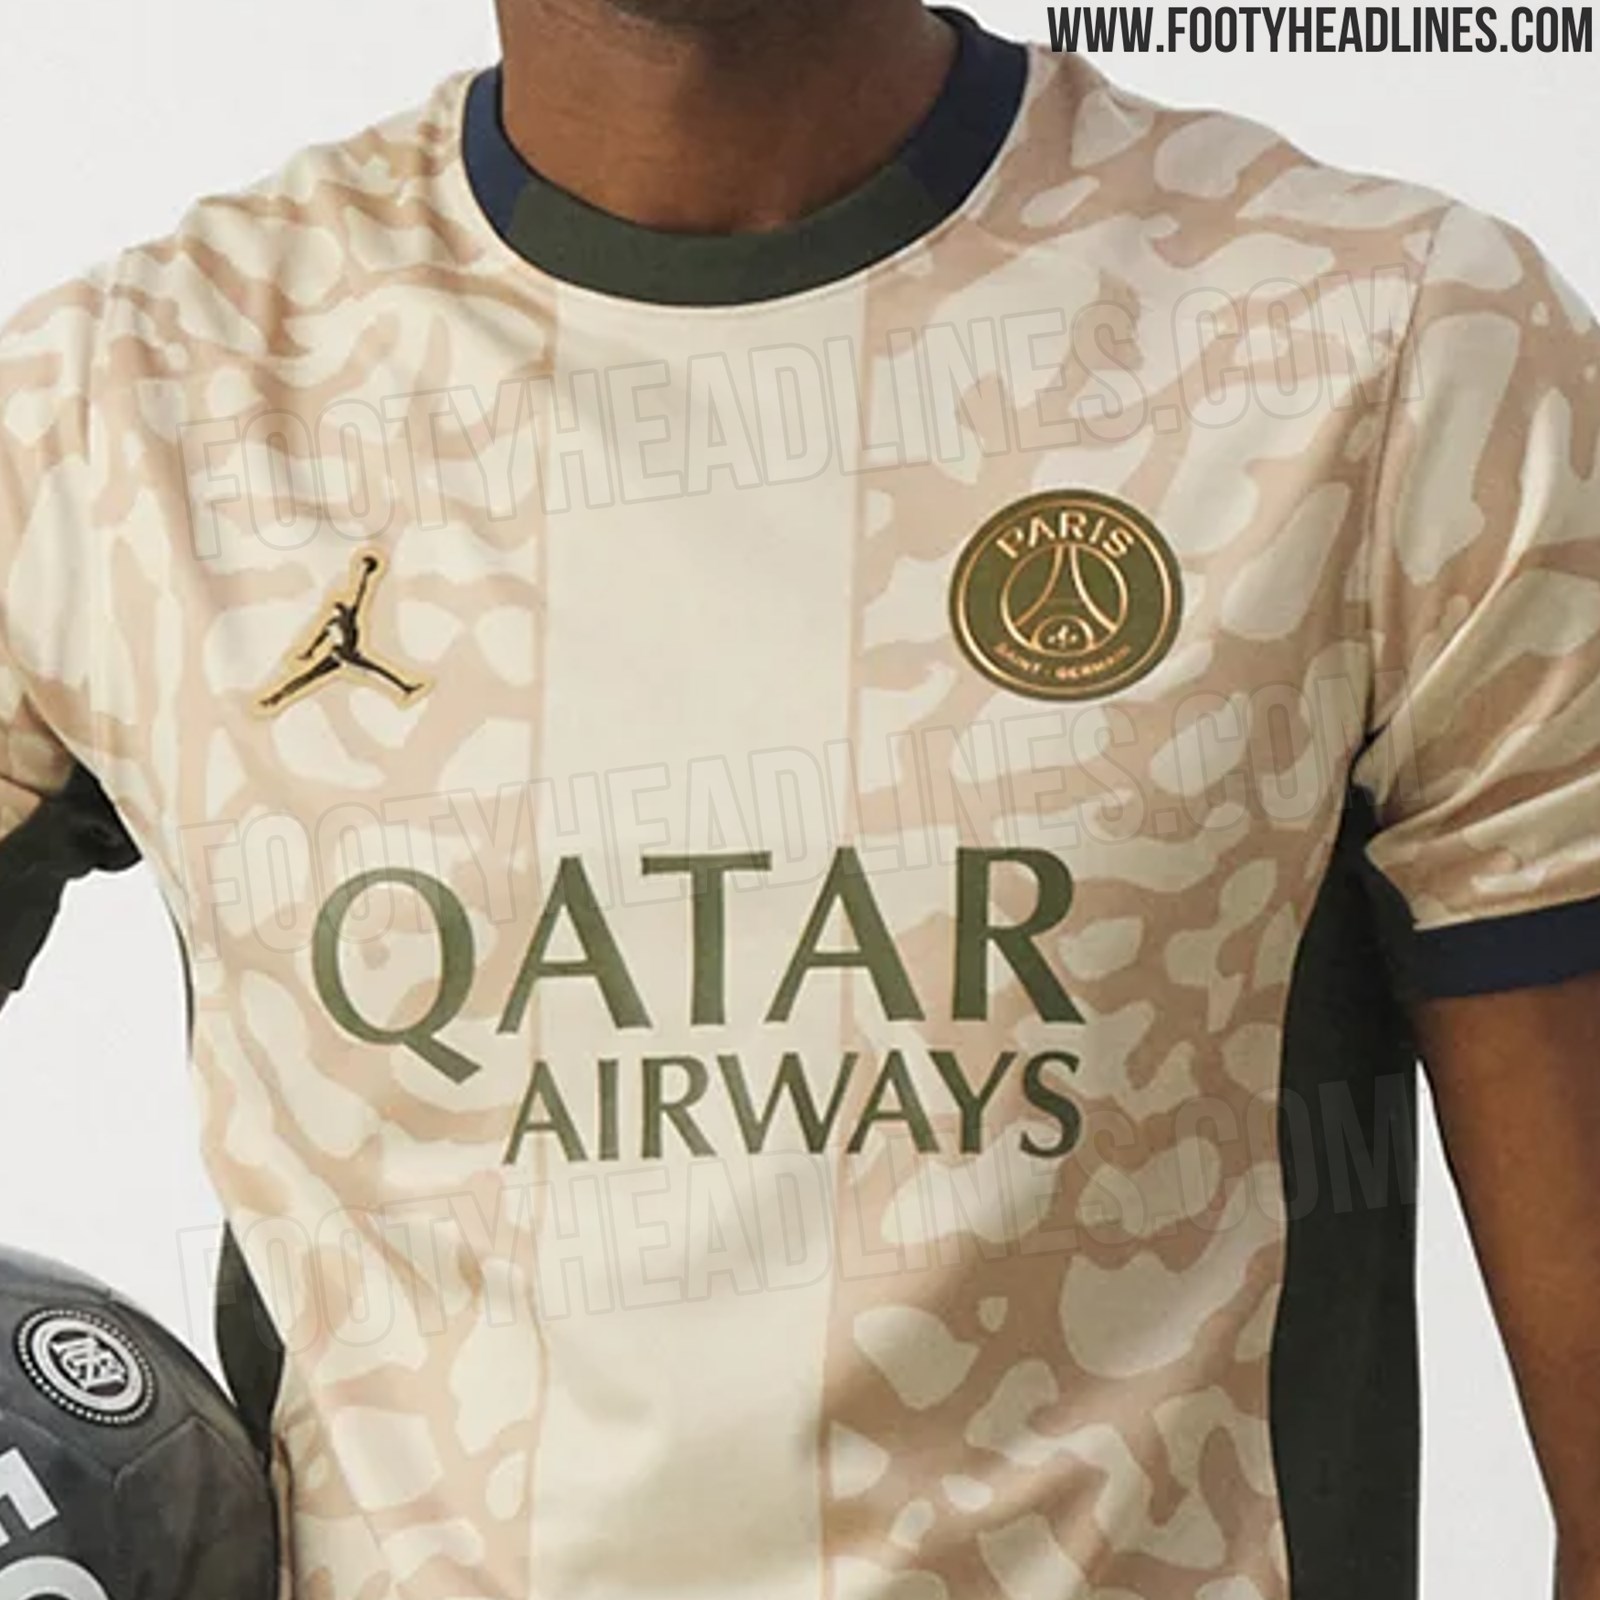 Jordan PSG 23-24 Fourth Kit Leaked - Official Pictures - Footy Headlines